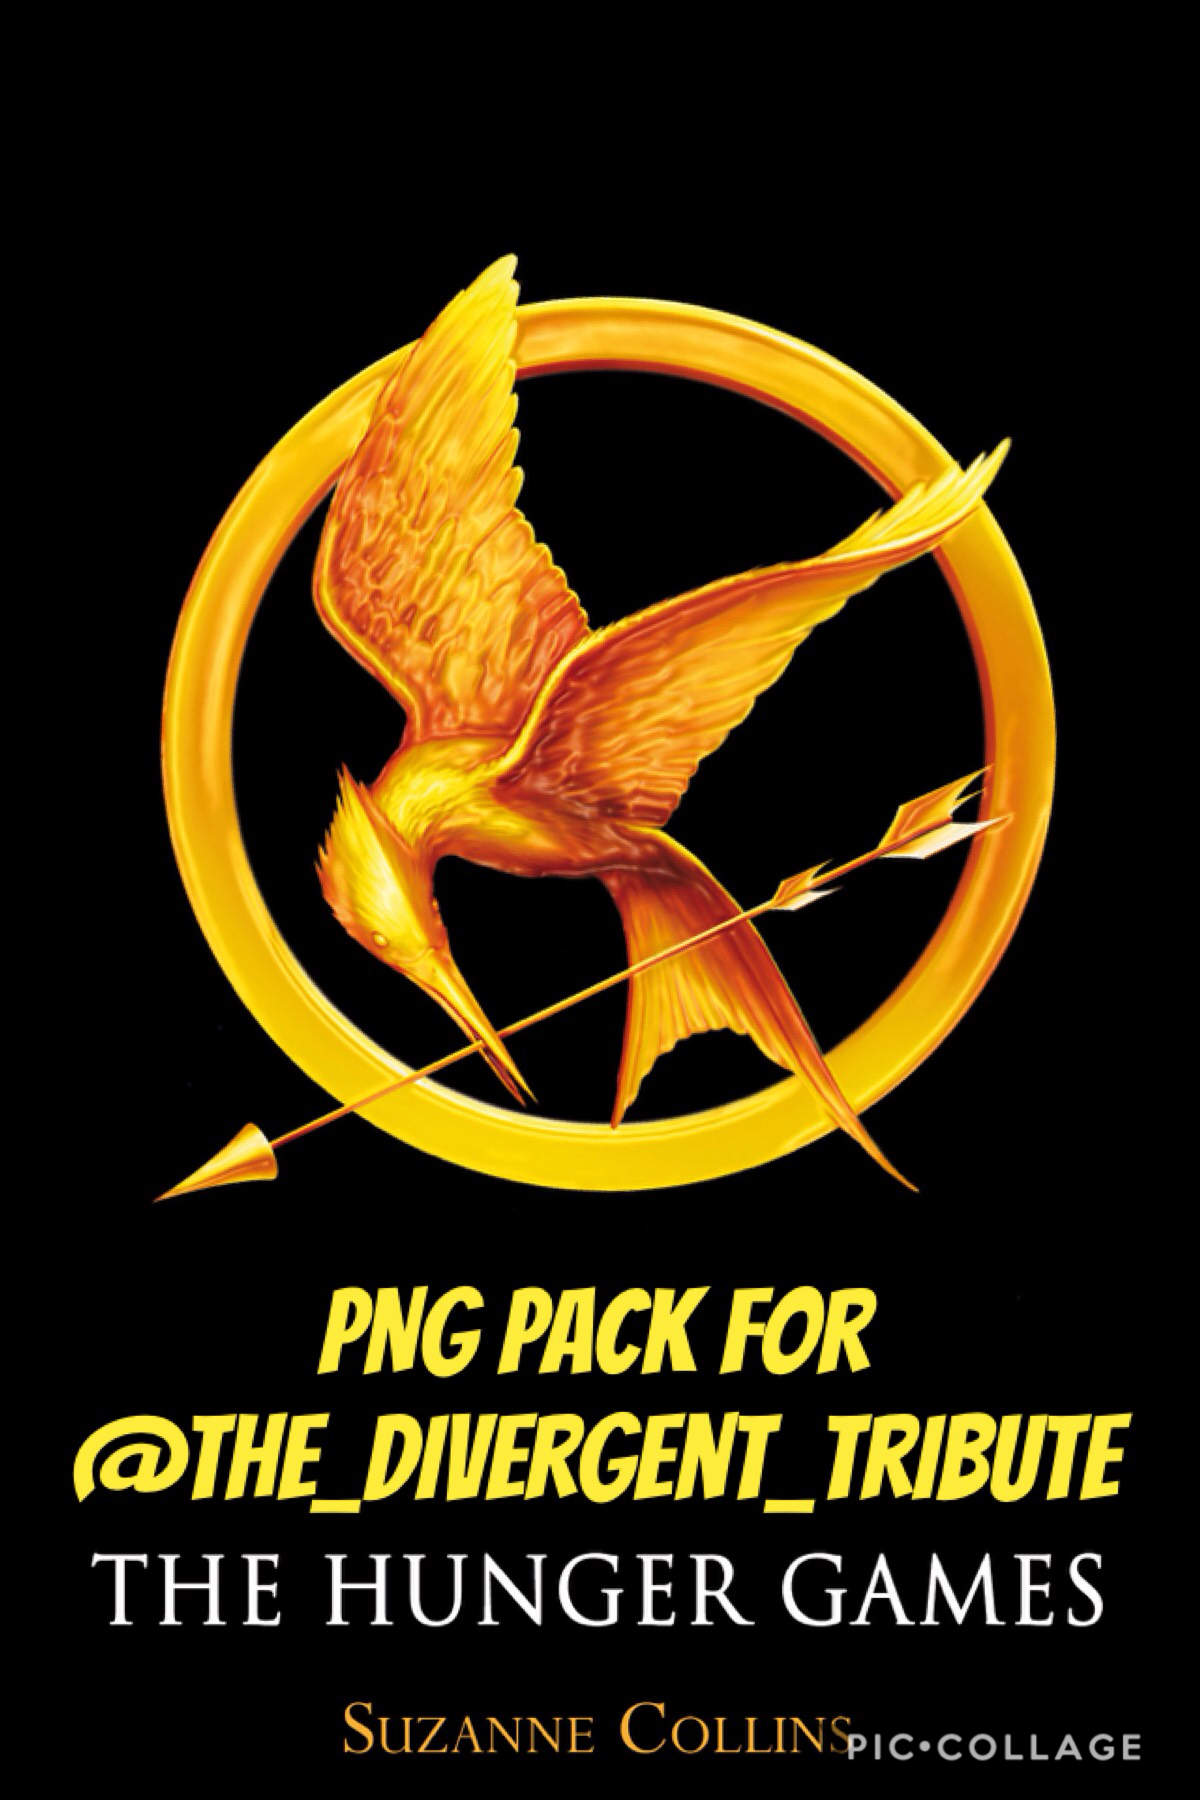 Only for @The_Divergent_Tribute